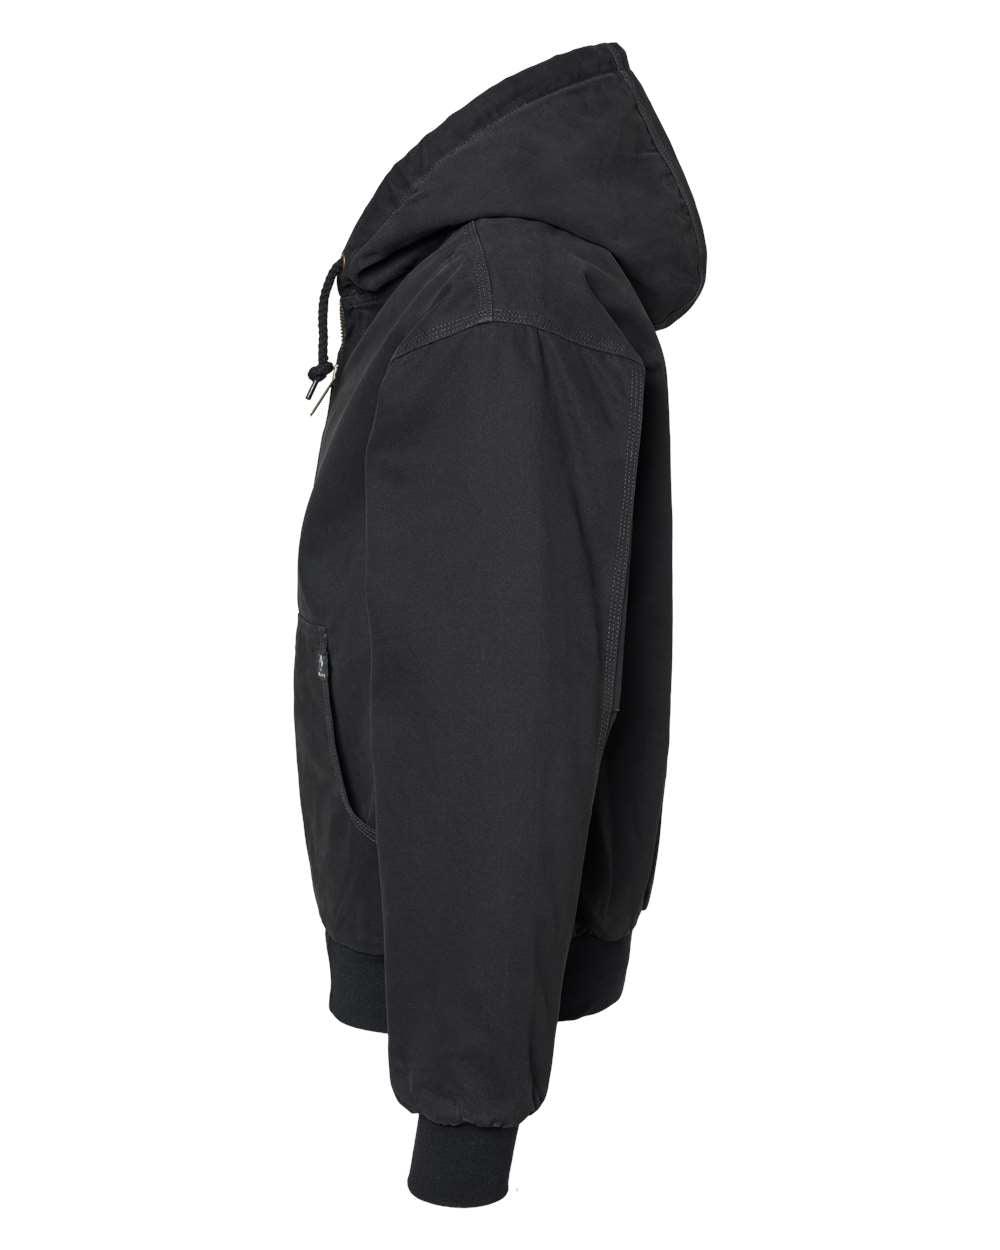 DRI DUCK Cheyenne Boulder Cloth™ Hooded Jacket with Tricot Quilt Lining 5020 #color_Black